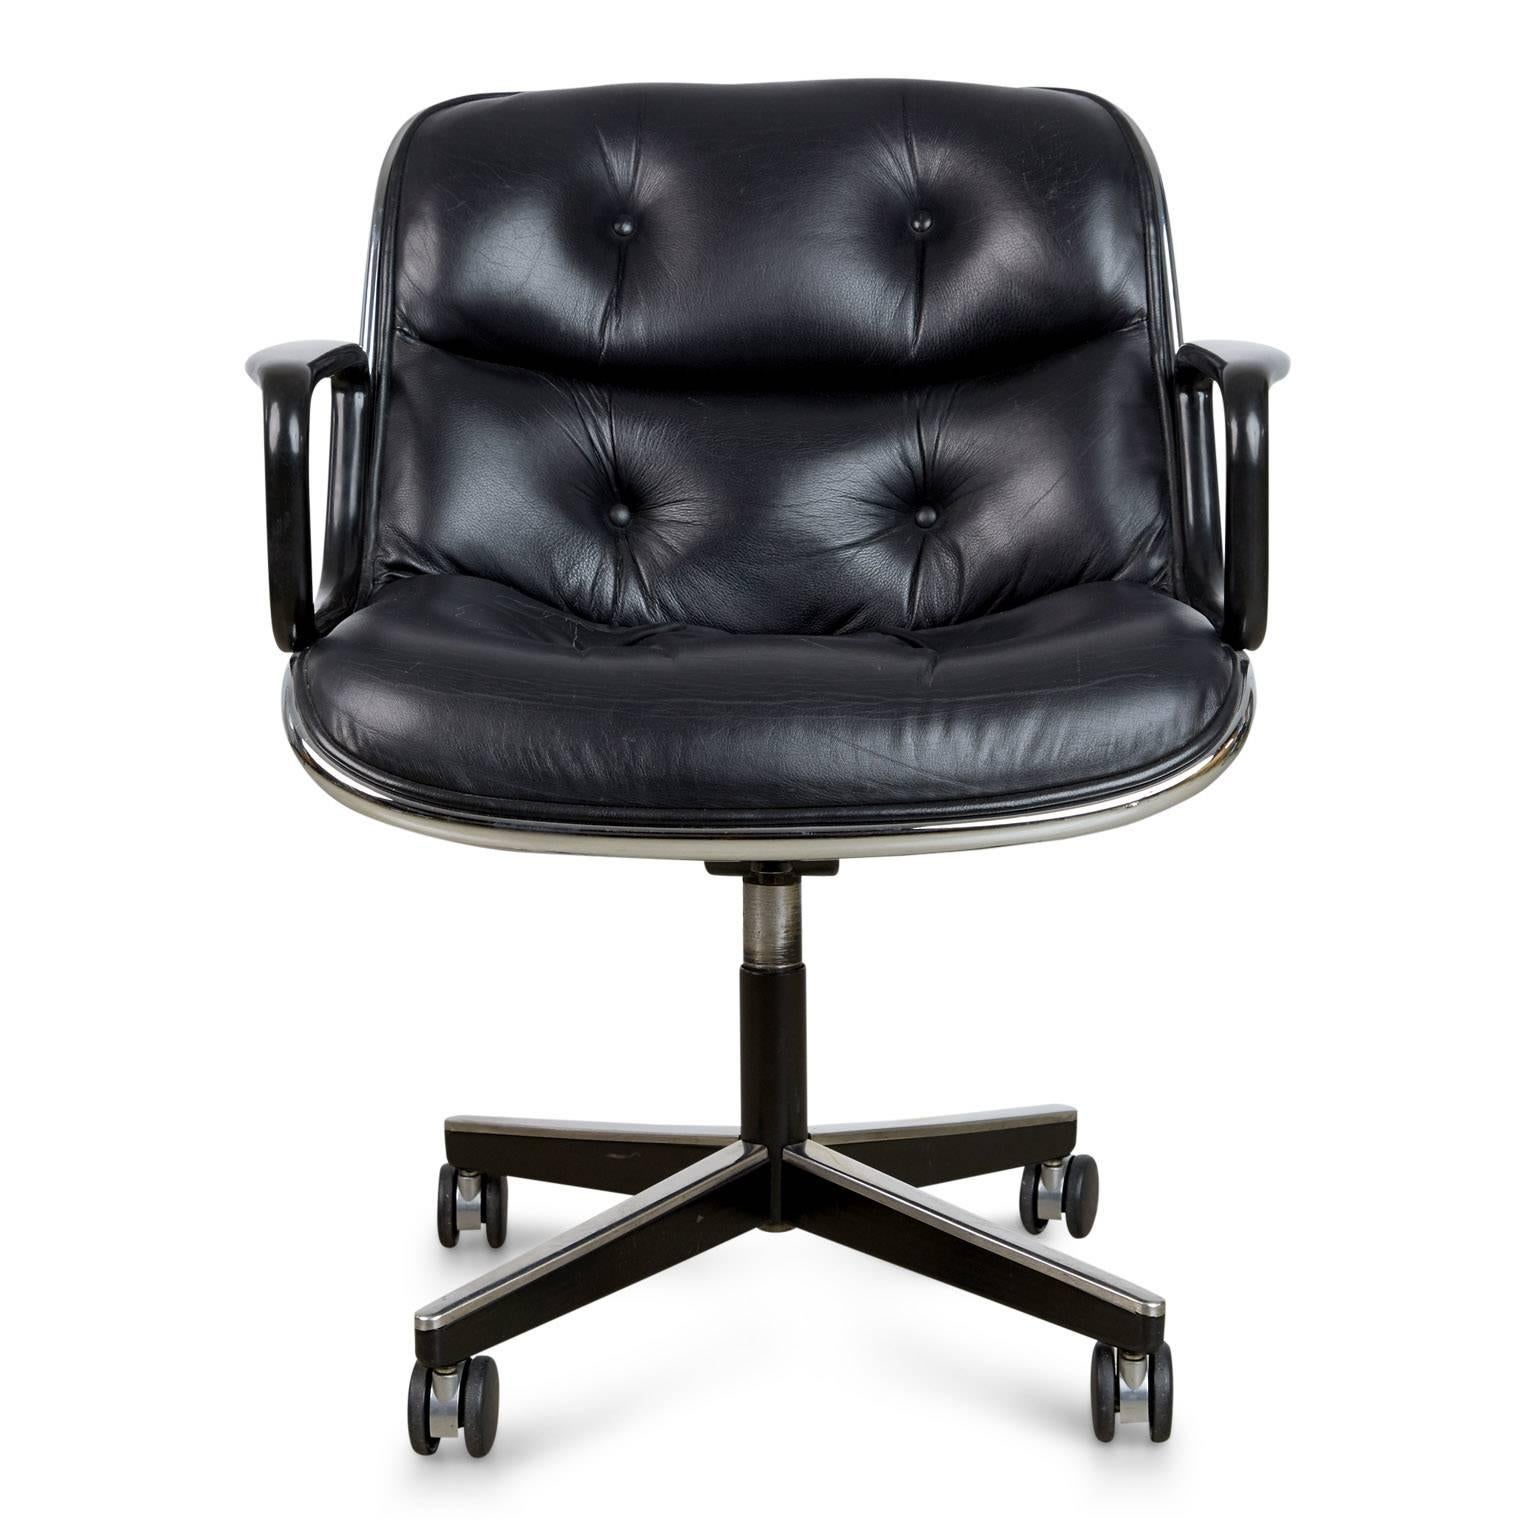 Knoll first introduced these executive office armchairs in 1965 and since then they have become a recognized staple for professional interiors and home workspaces alike. These timeless chairs are still in production today and have met demand due to